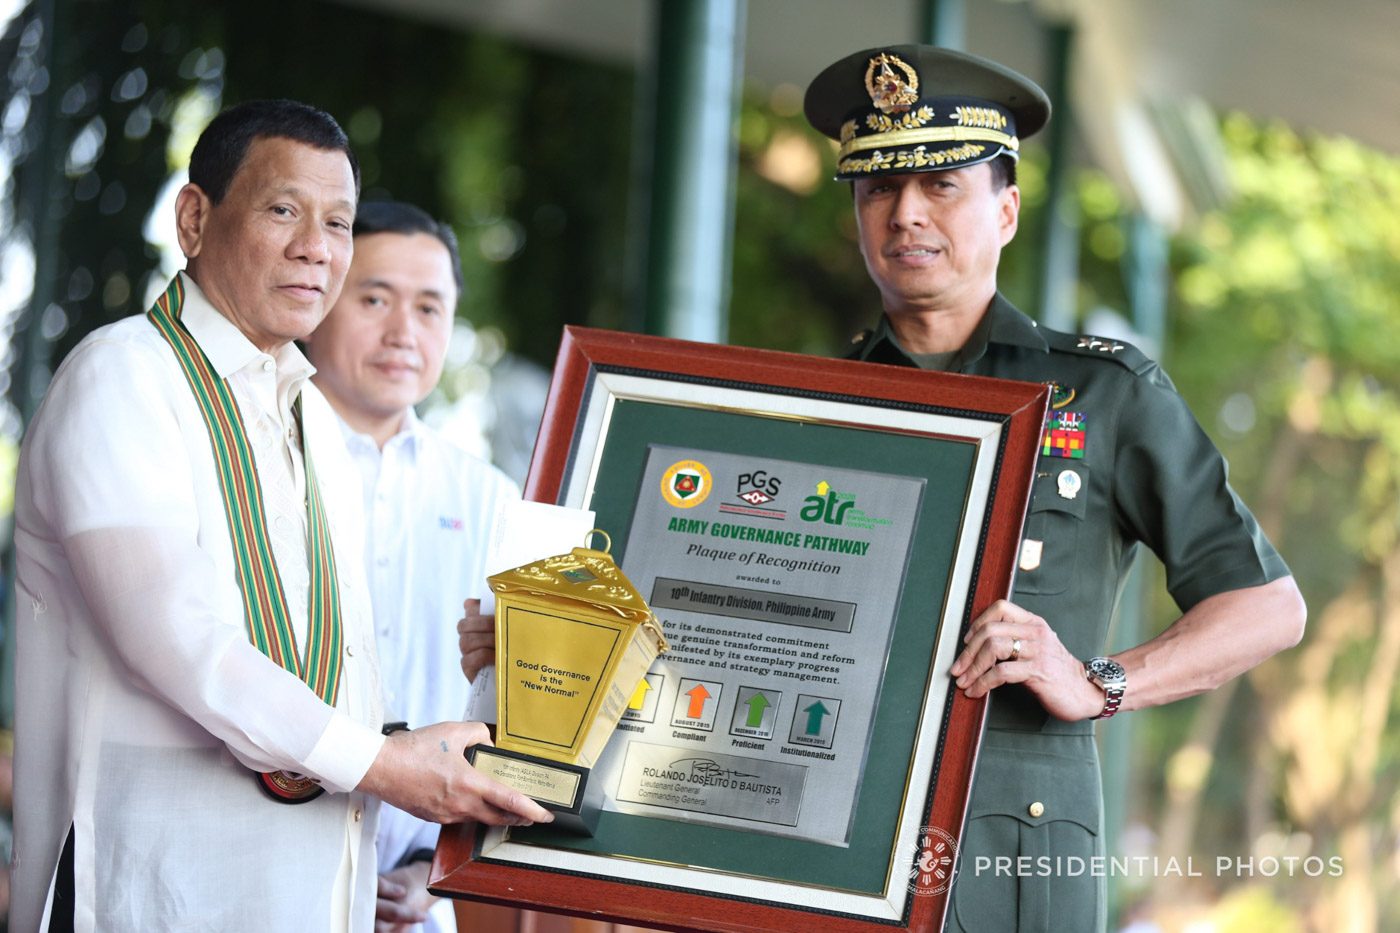 AWARDEE. President Rodrigo Duterte confers the Army Governance Pathway Institutionalized Medallion award on the 10th Infantry Division represented by its commander, Major General Noel Clement. 